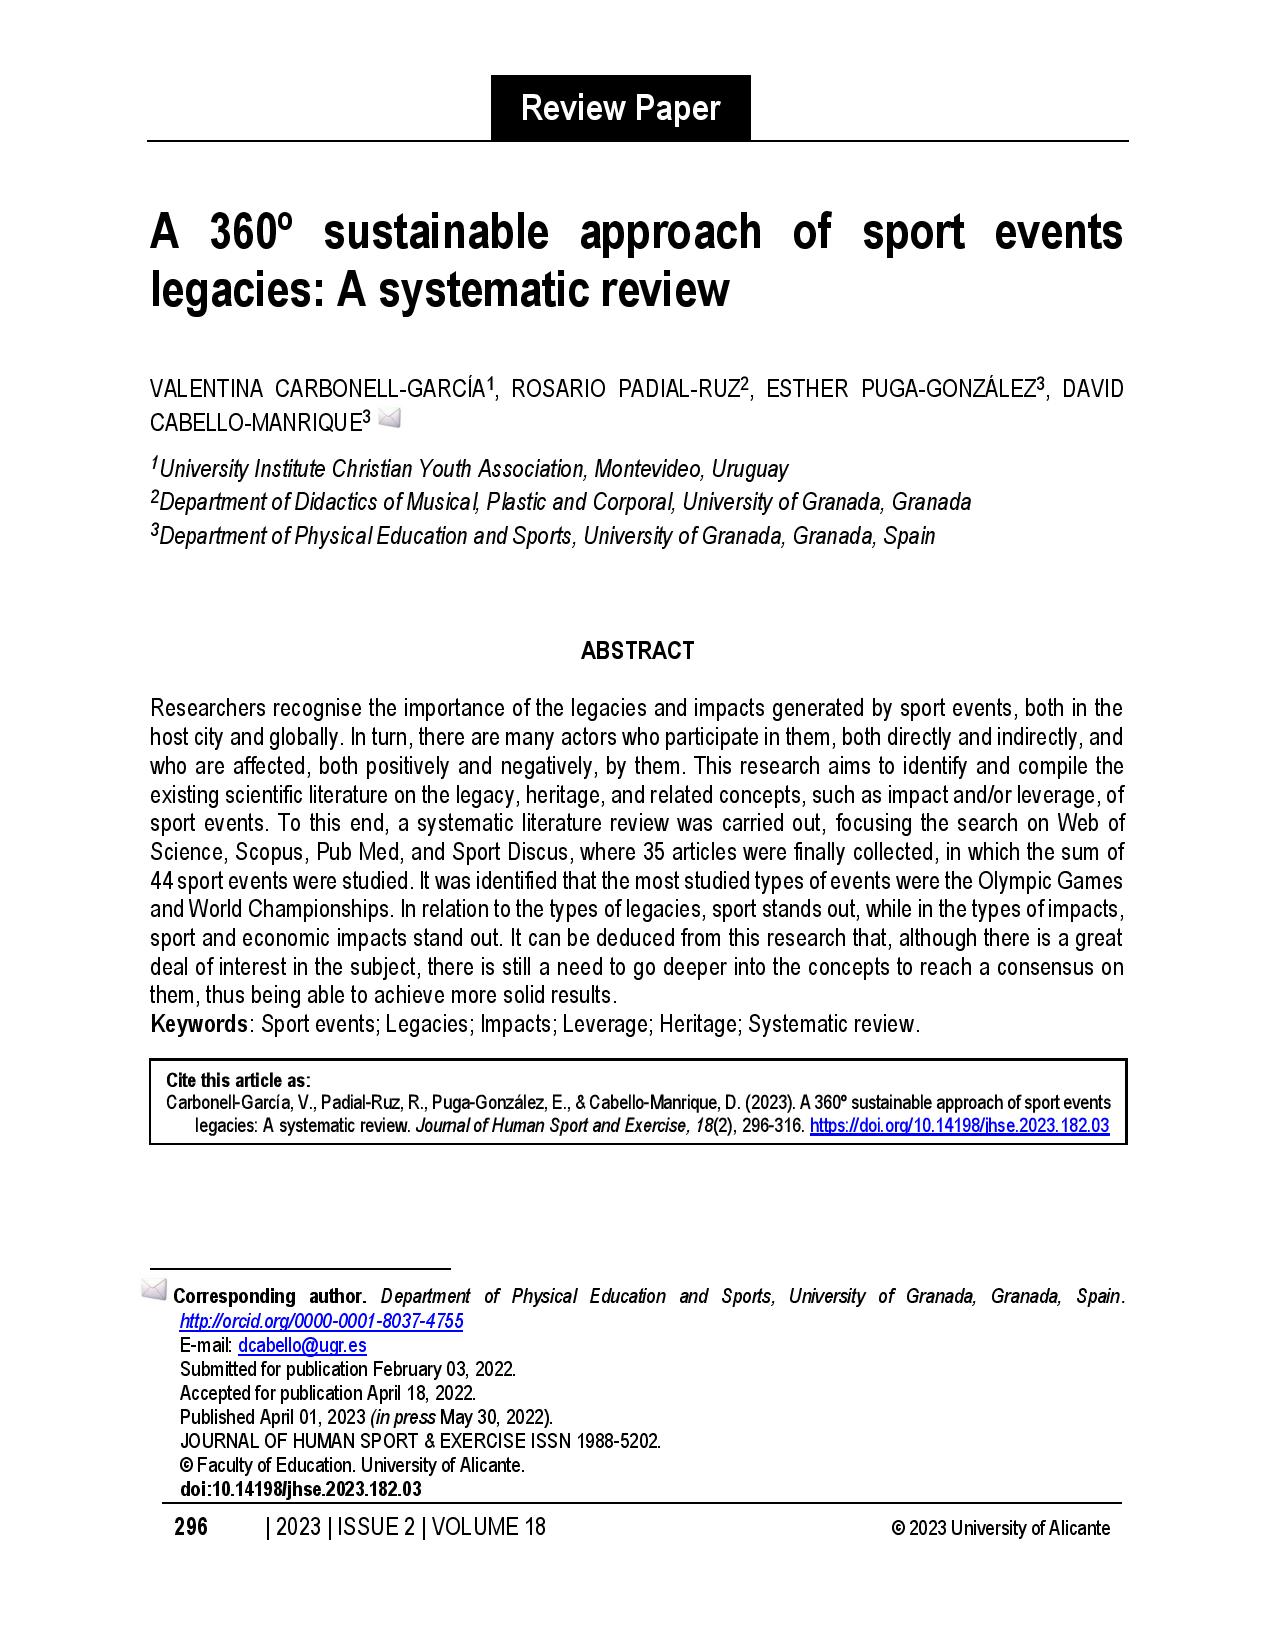 A 360º sustainable approach of sport events legacies: A systematic review